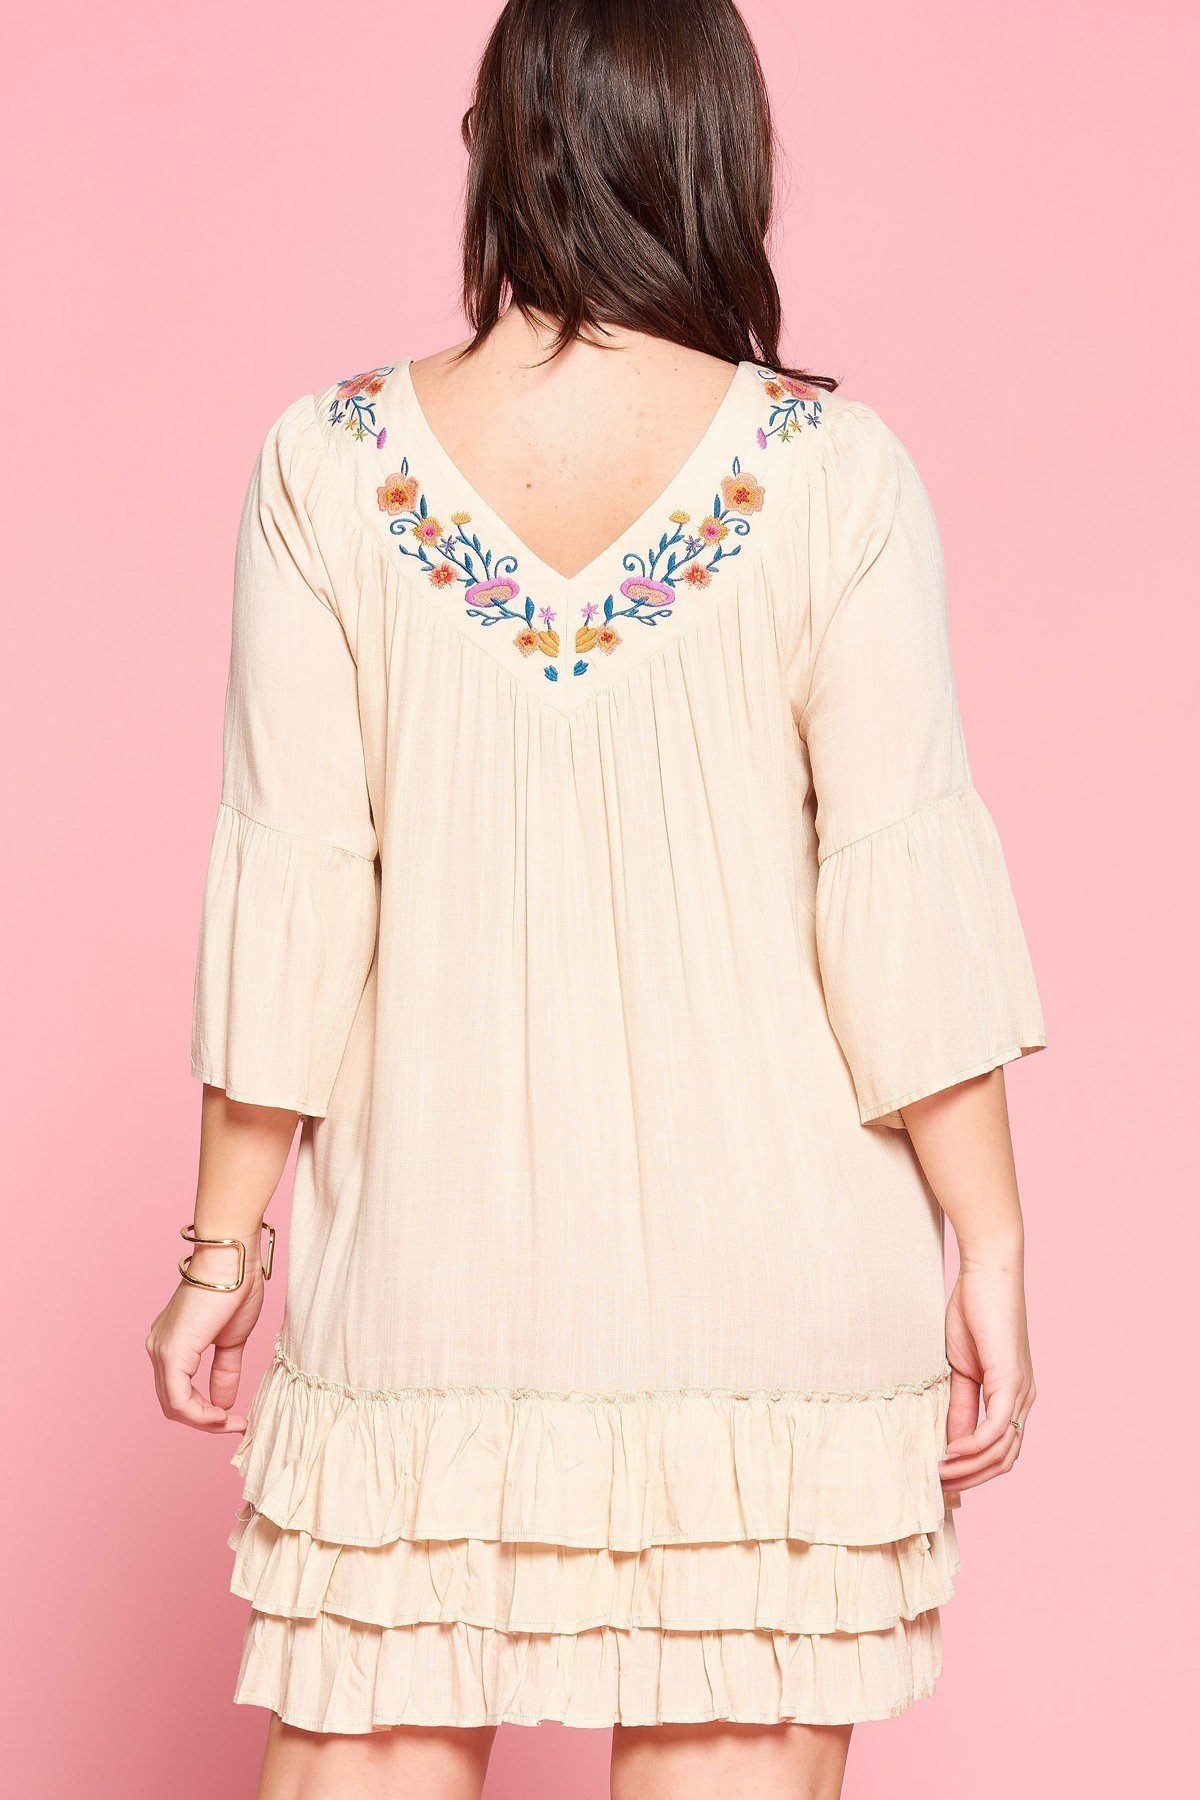 Light Up The Room With This Beautiful Floral Embroidered Shift Dress